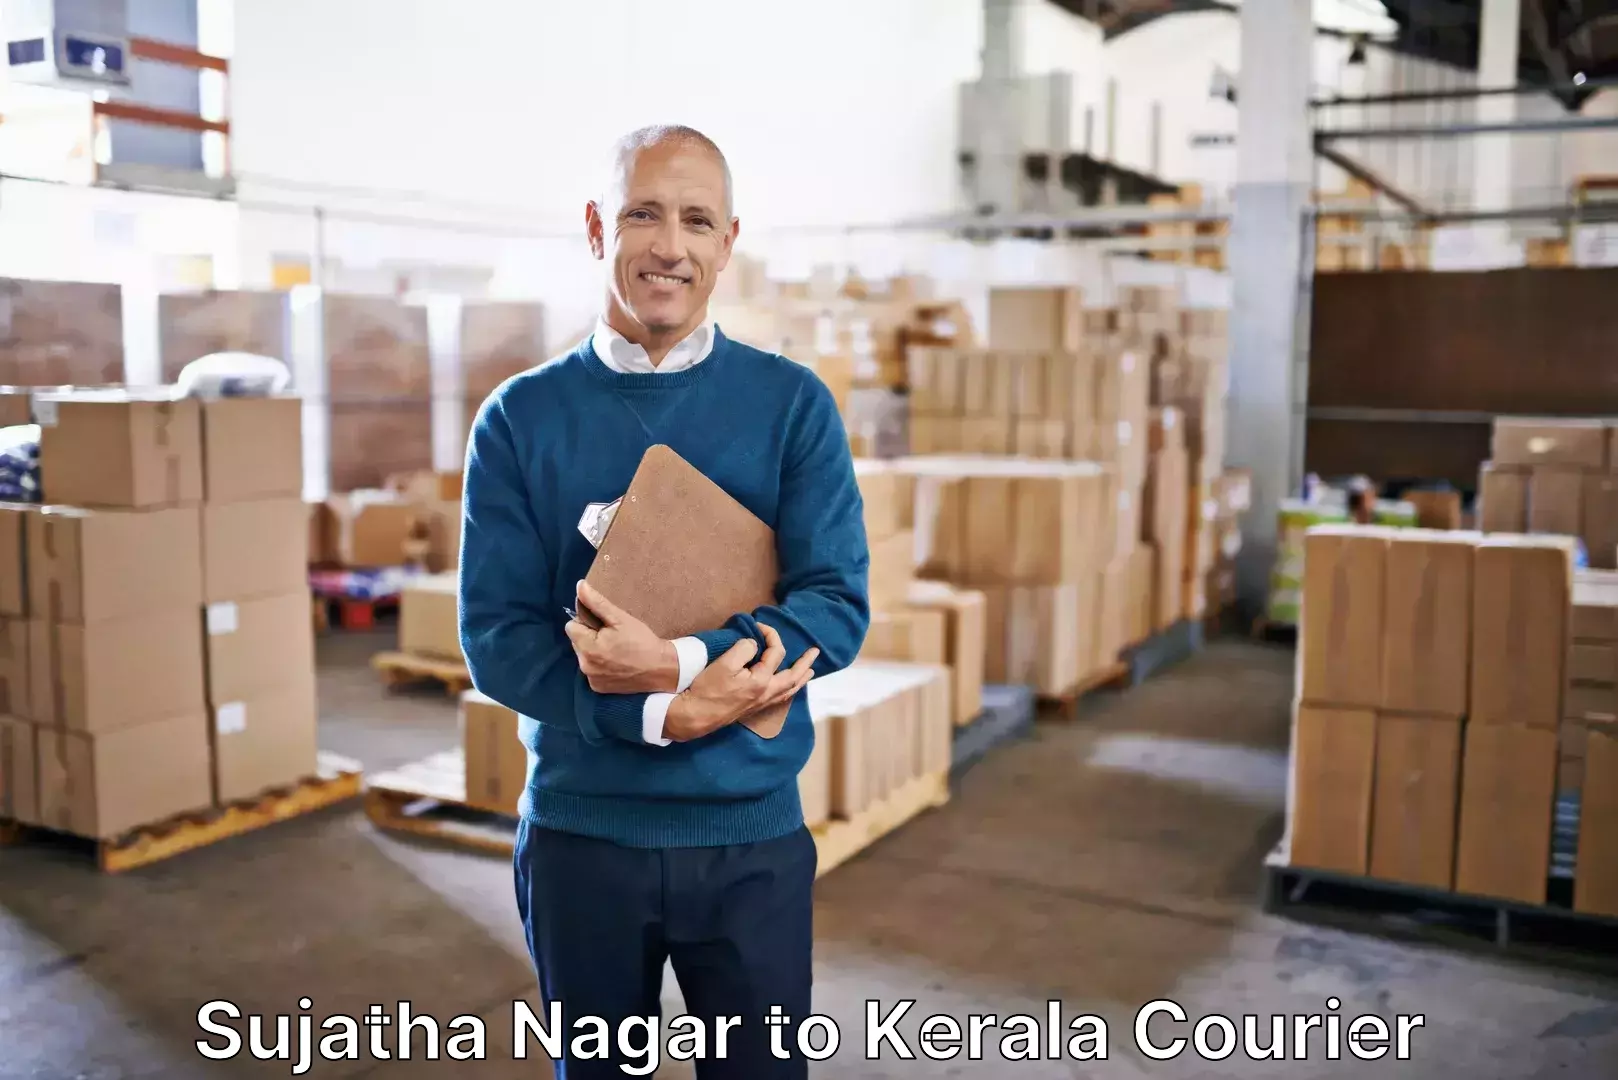 Luggage shipping service Sujatha Nagar to Cochin University of Science and Technology